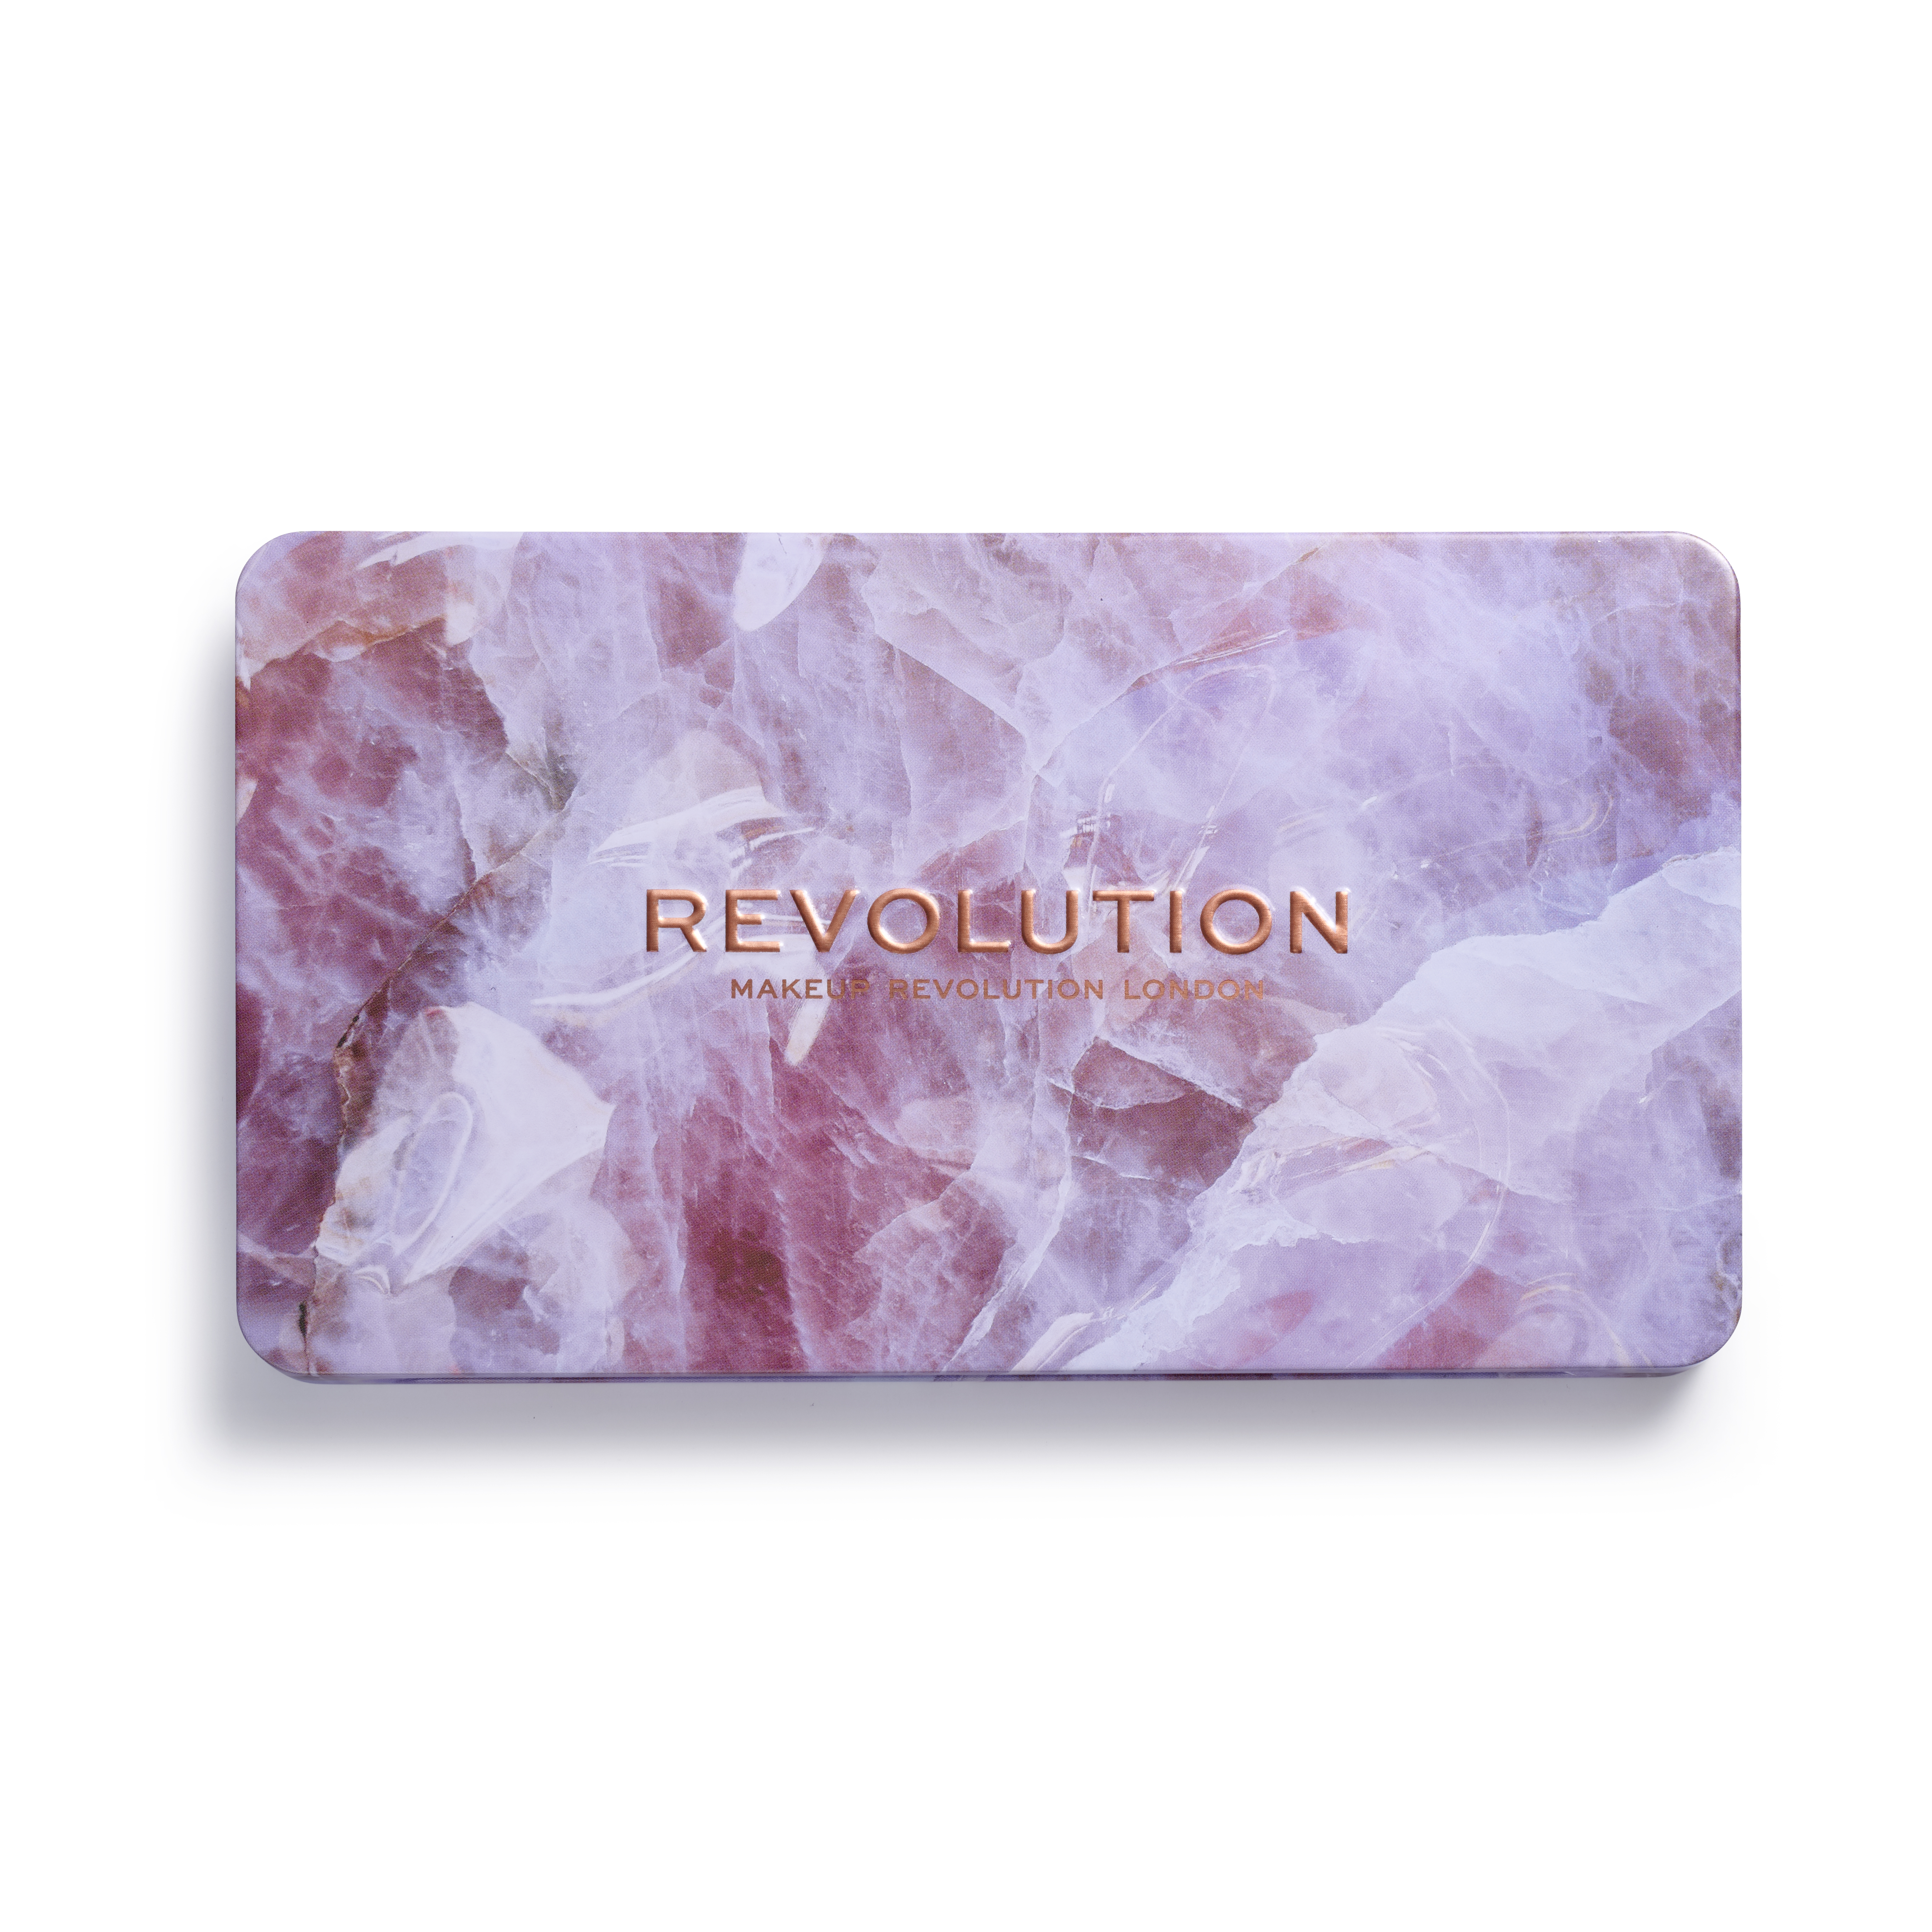 Makeup Revolution Forever Flawless Unconditional Love 15 g.